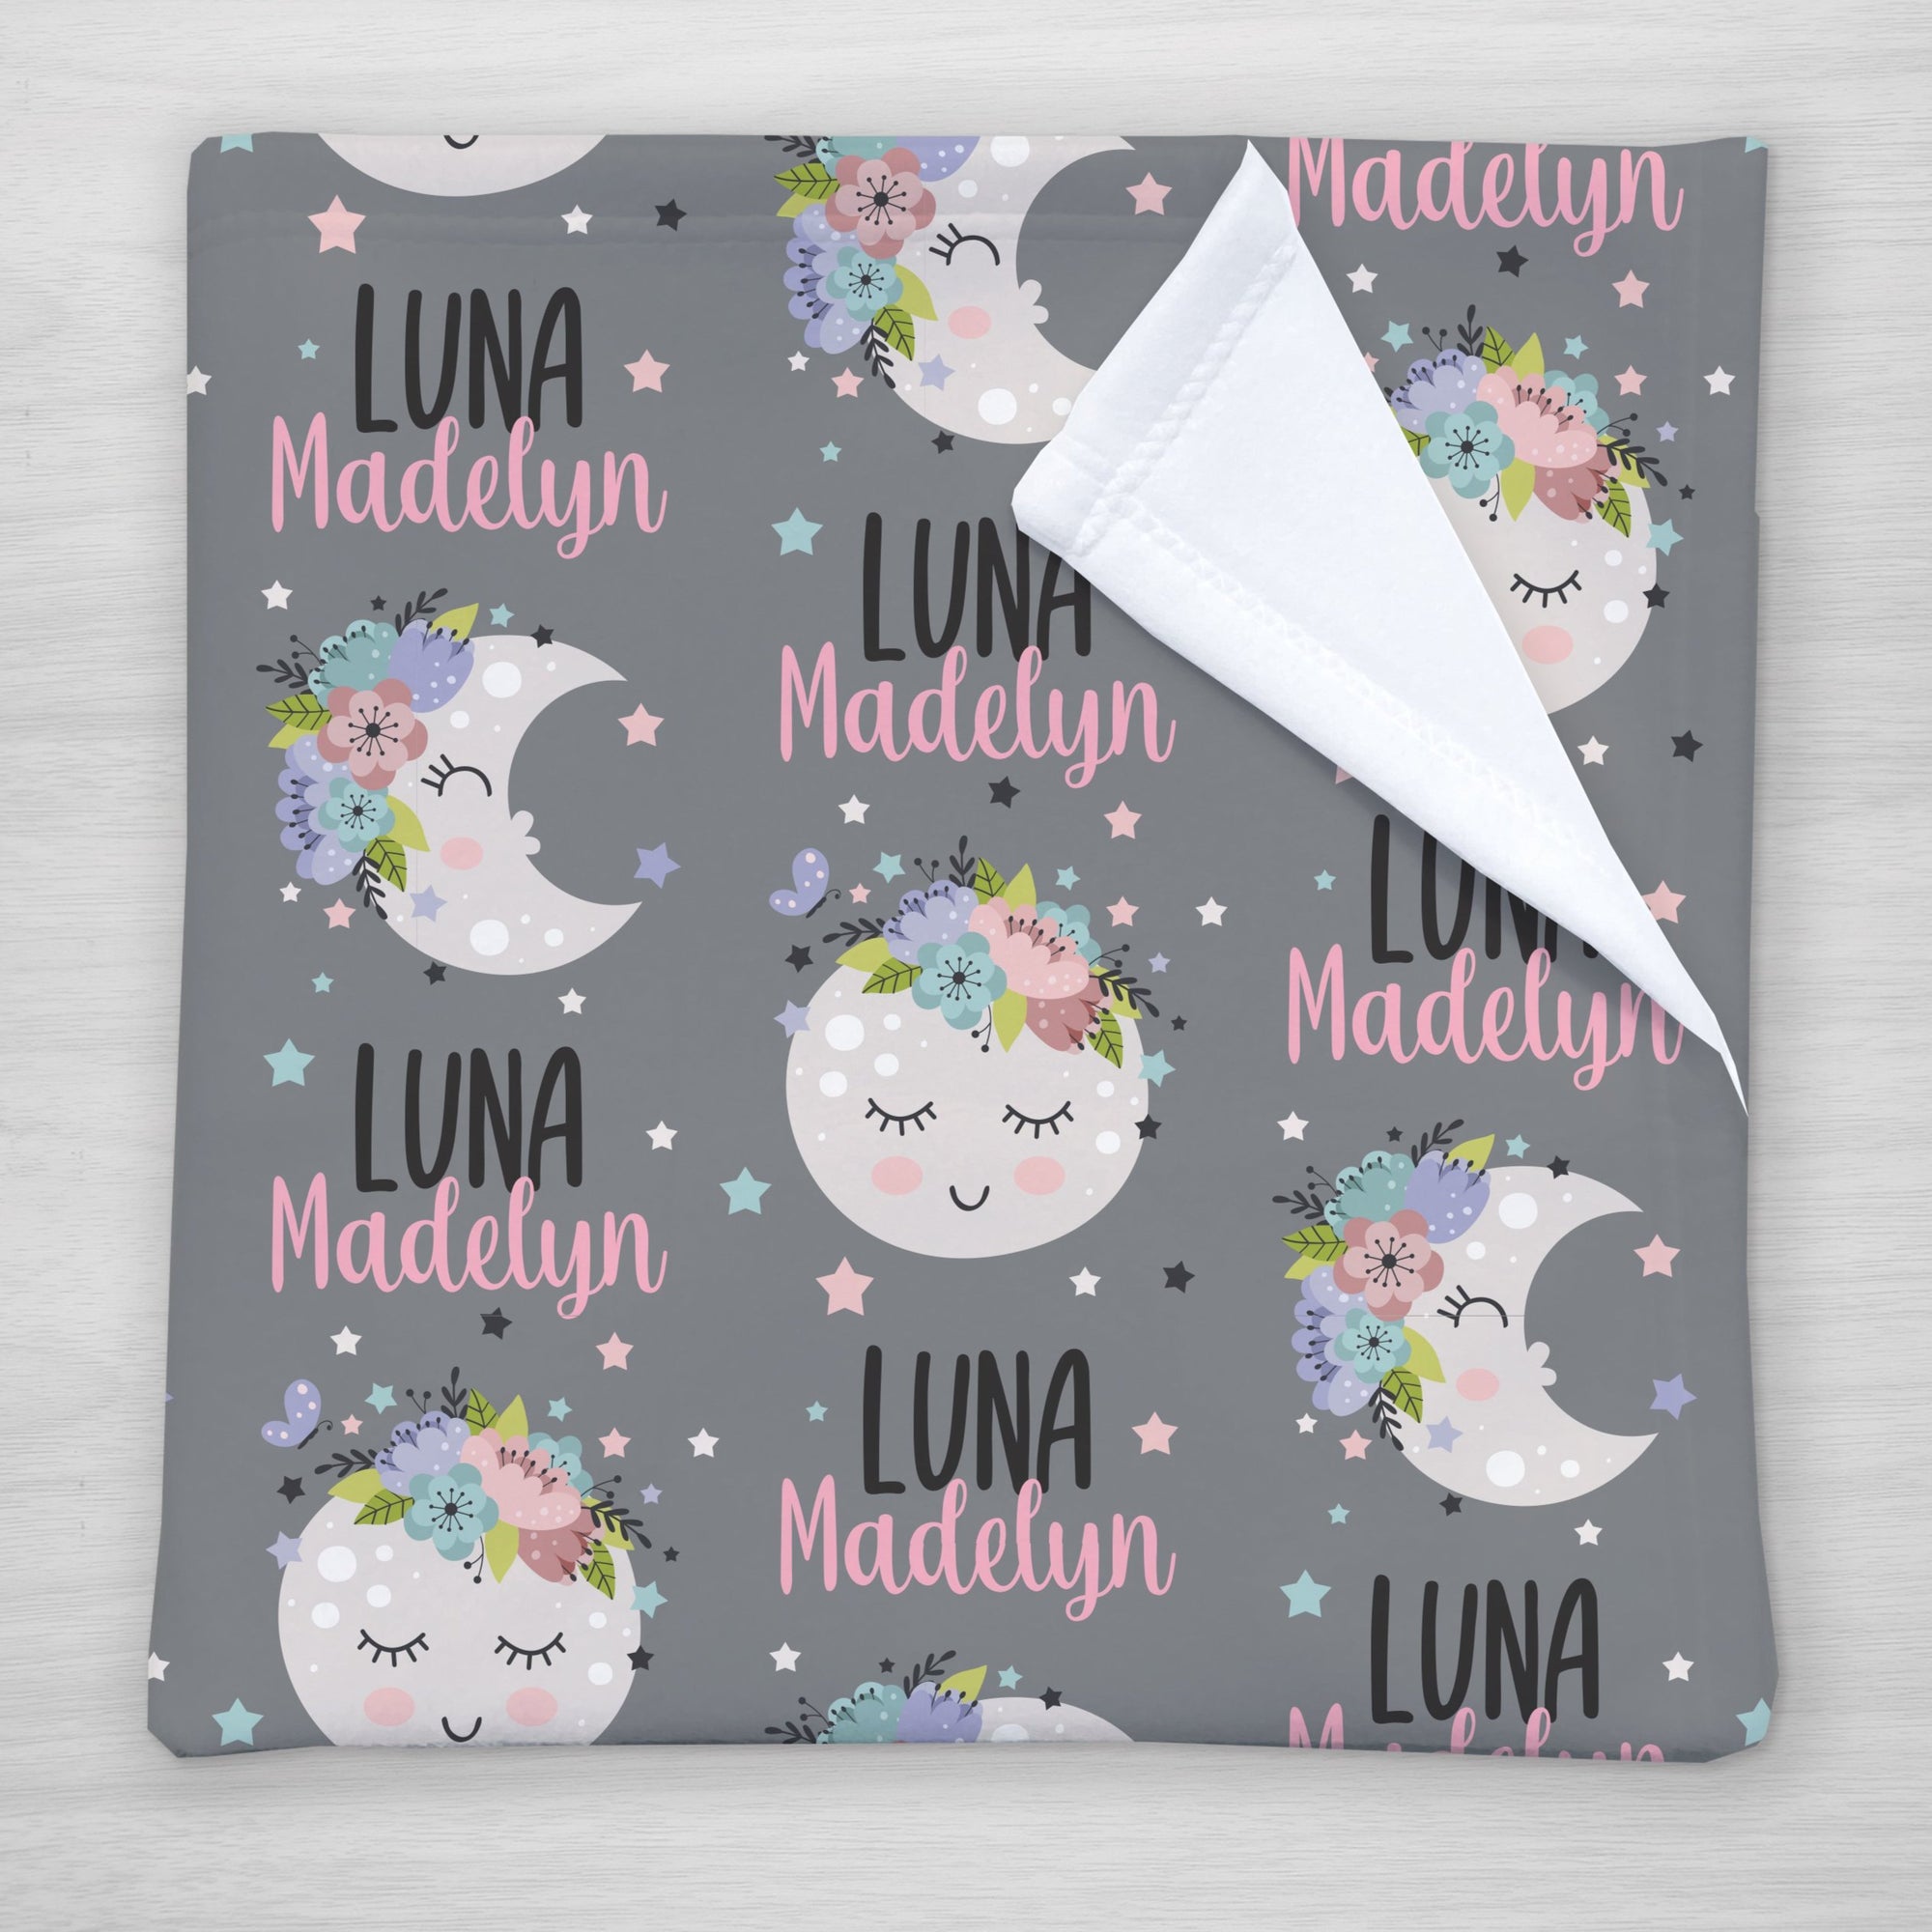 Sweet moon faces with flowers and stars baby name blanket.   Swaddle | Fluffy Minky | Pipsy.com